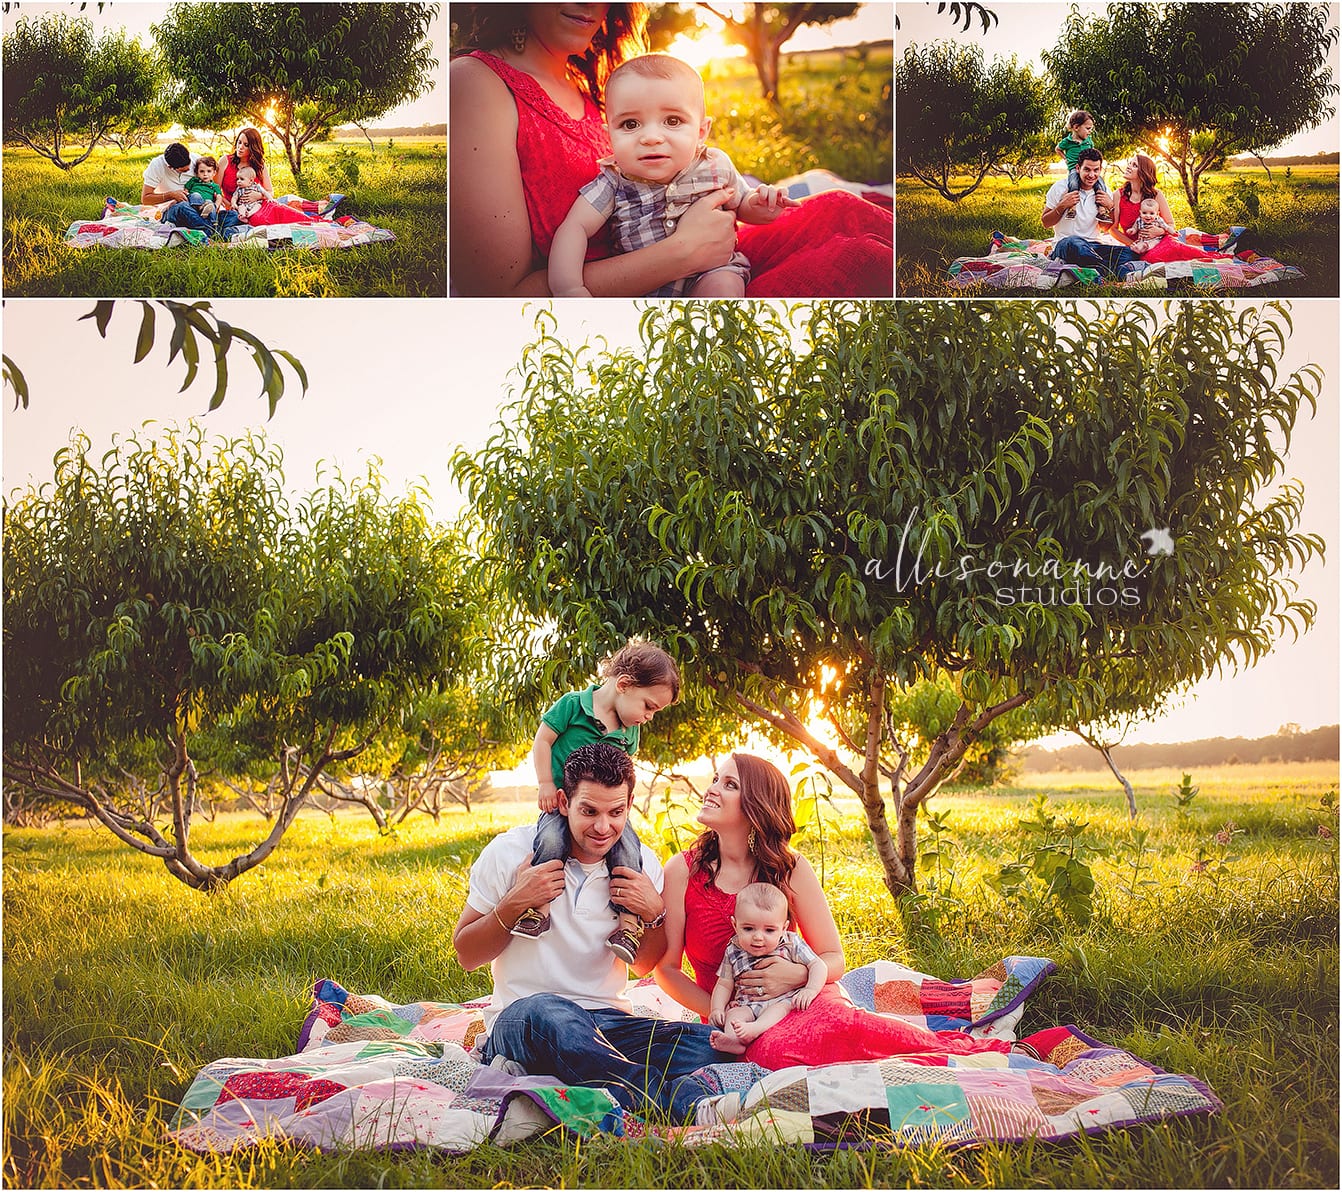 Burberry, peach orchards, AllisonAnne Studios, First Year Journey Package, returning customers, brothers, family, love, Hammonton, best family photographer